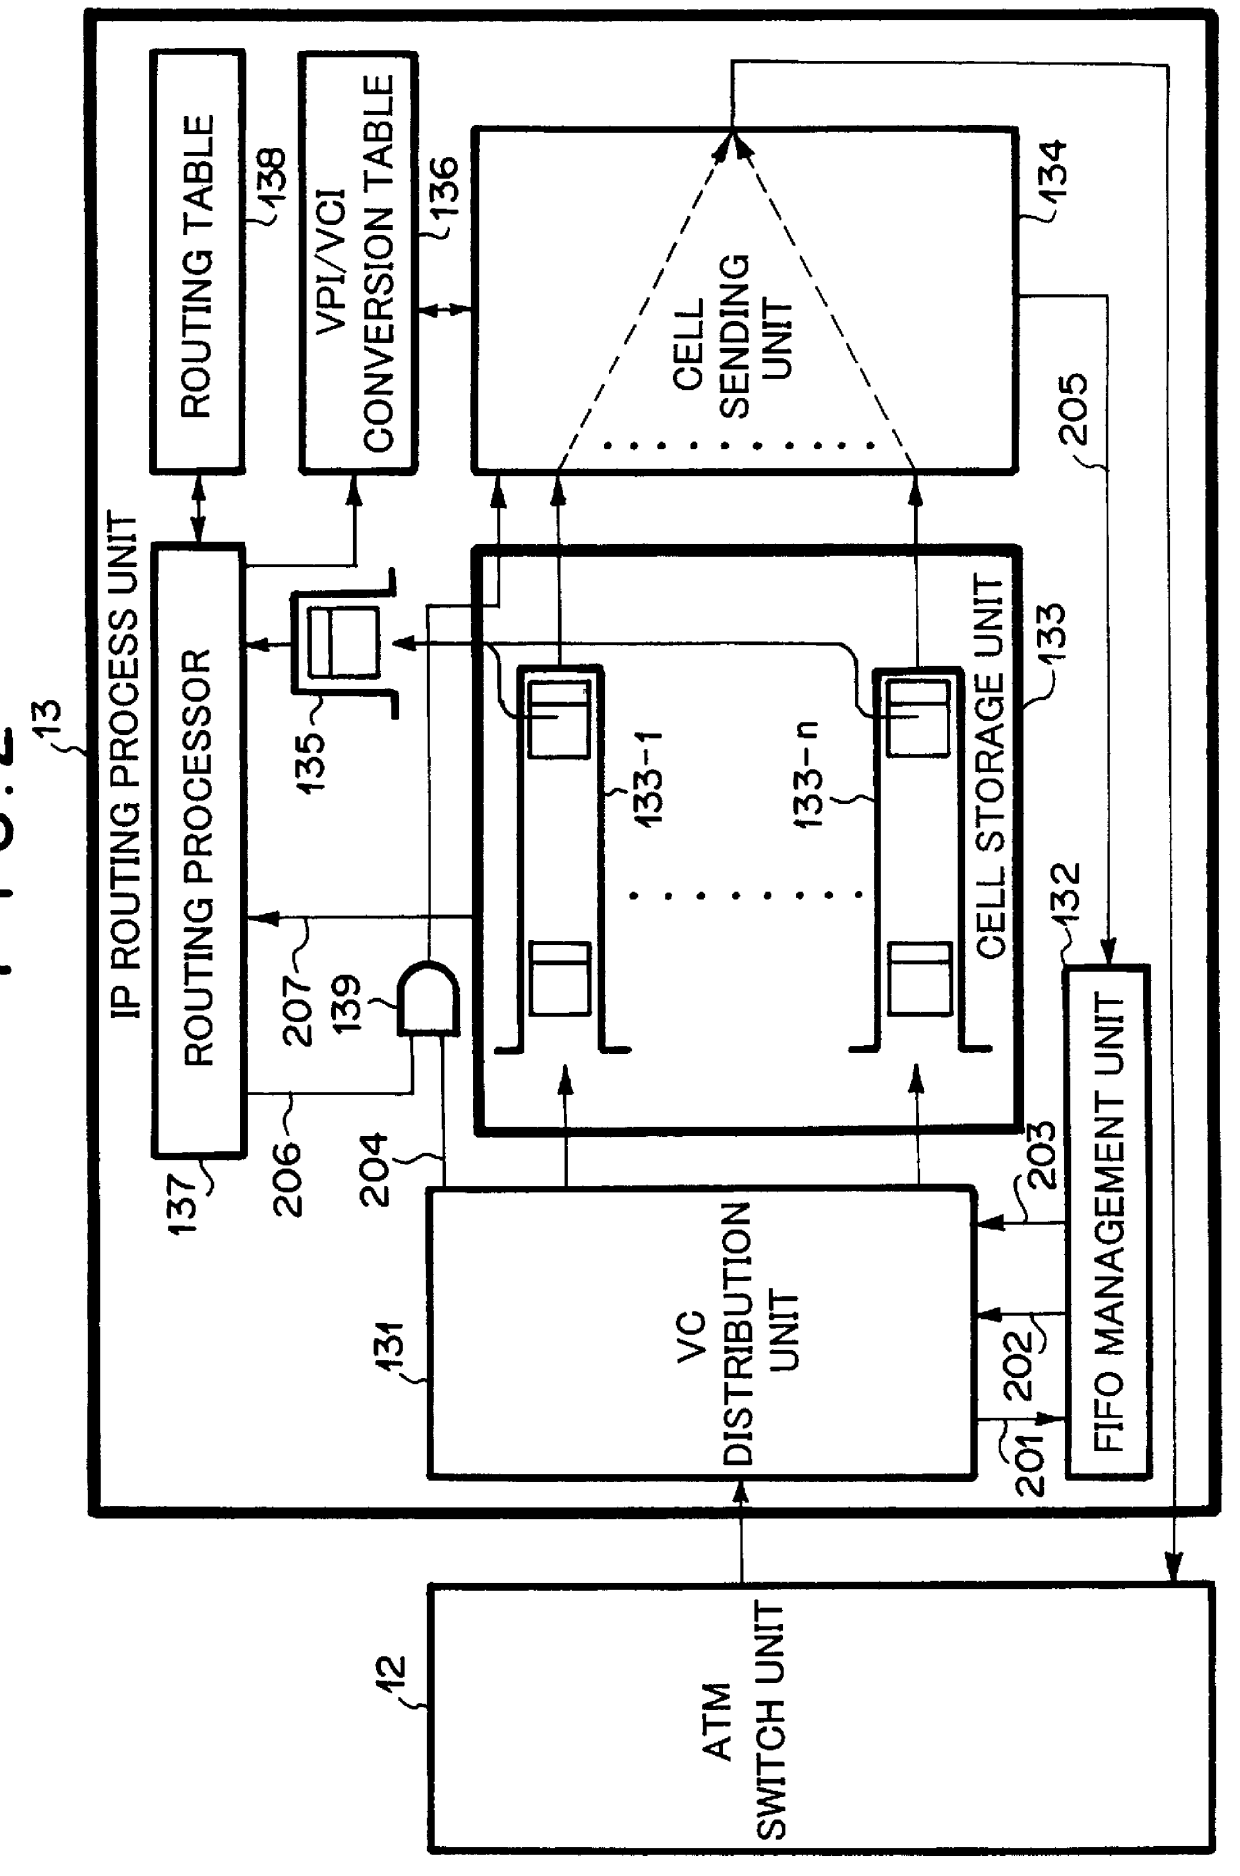 ATM switch capable of routing IP packet